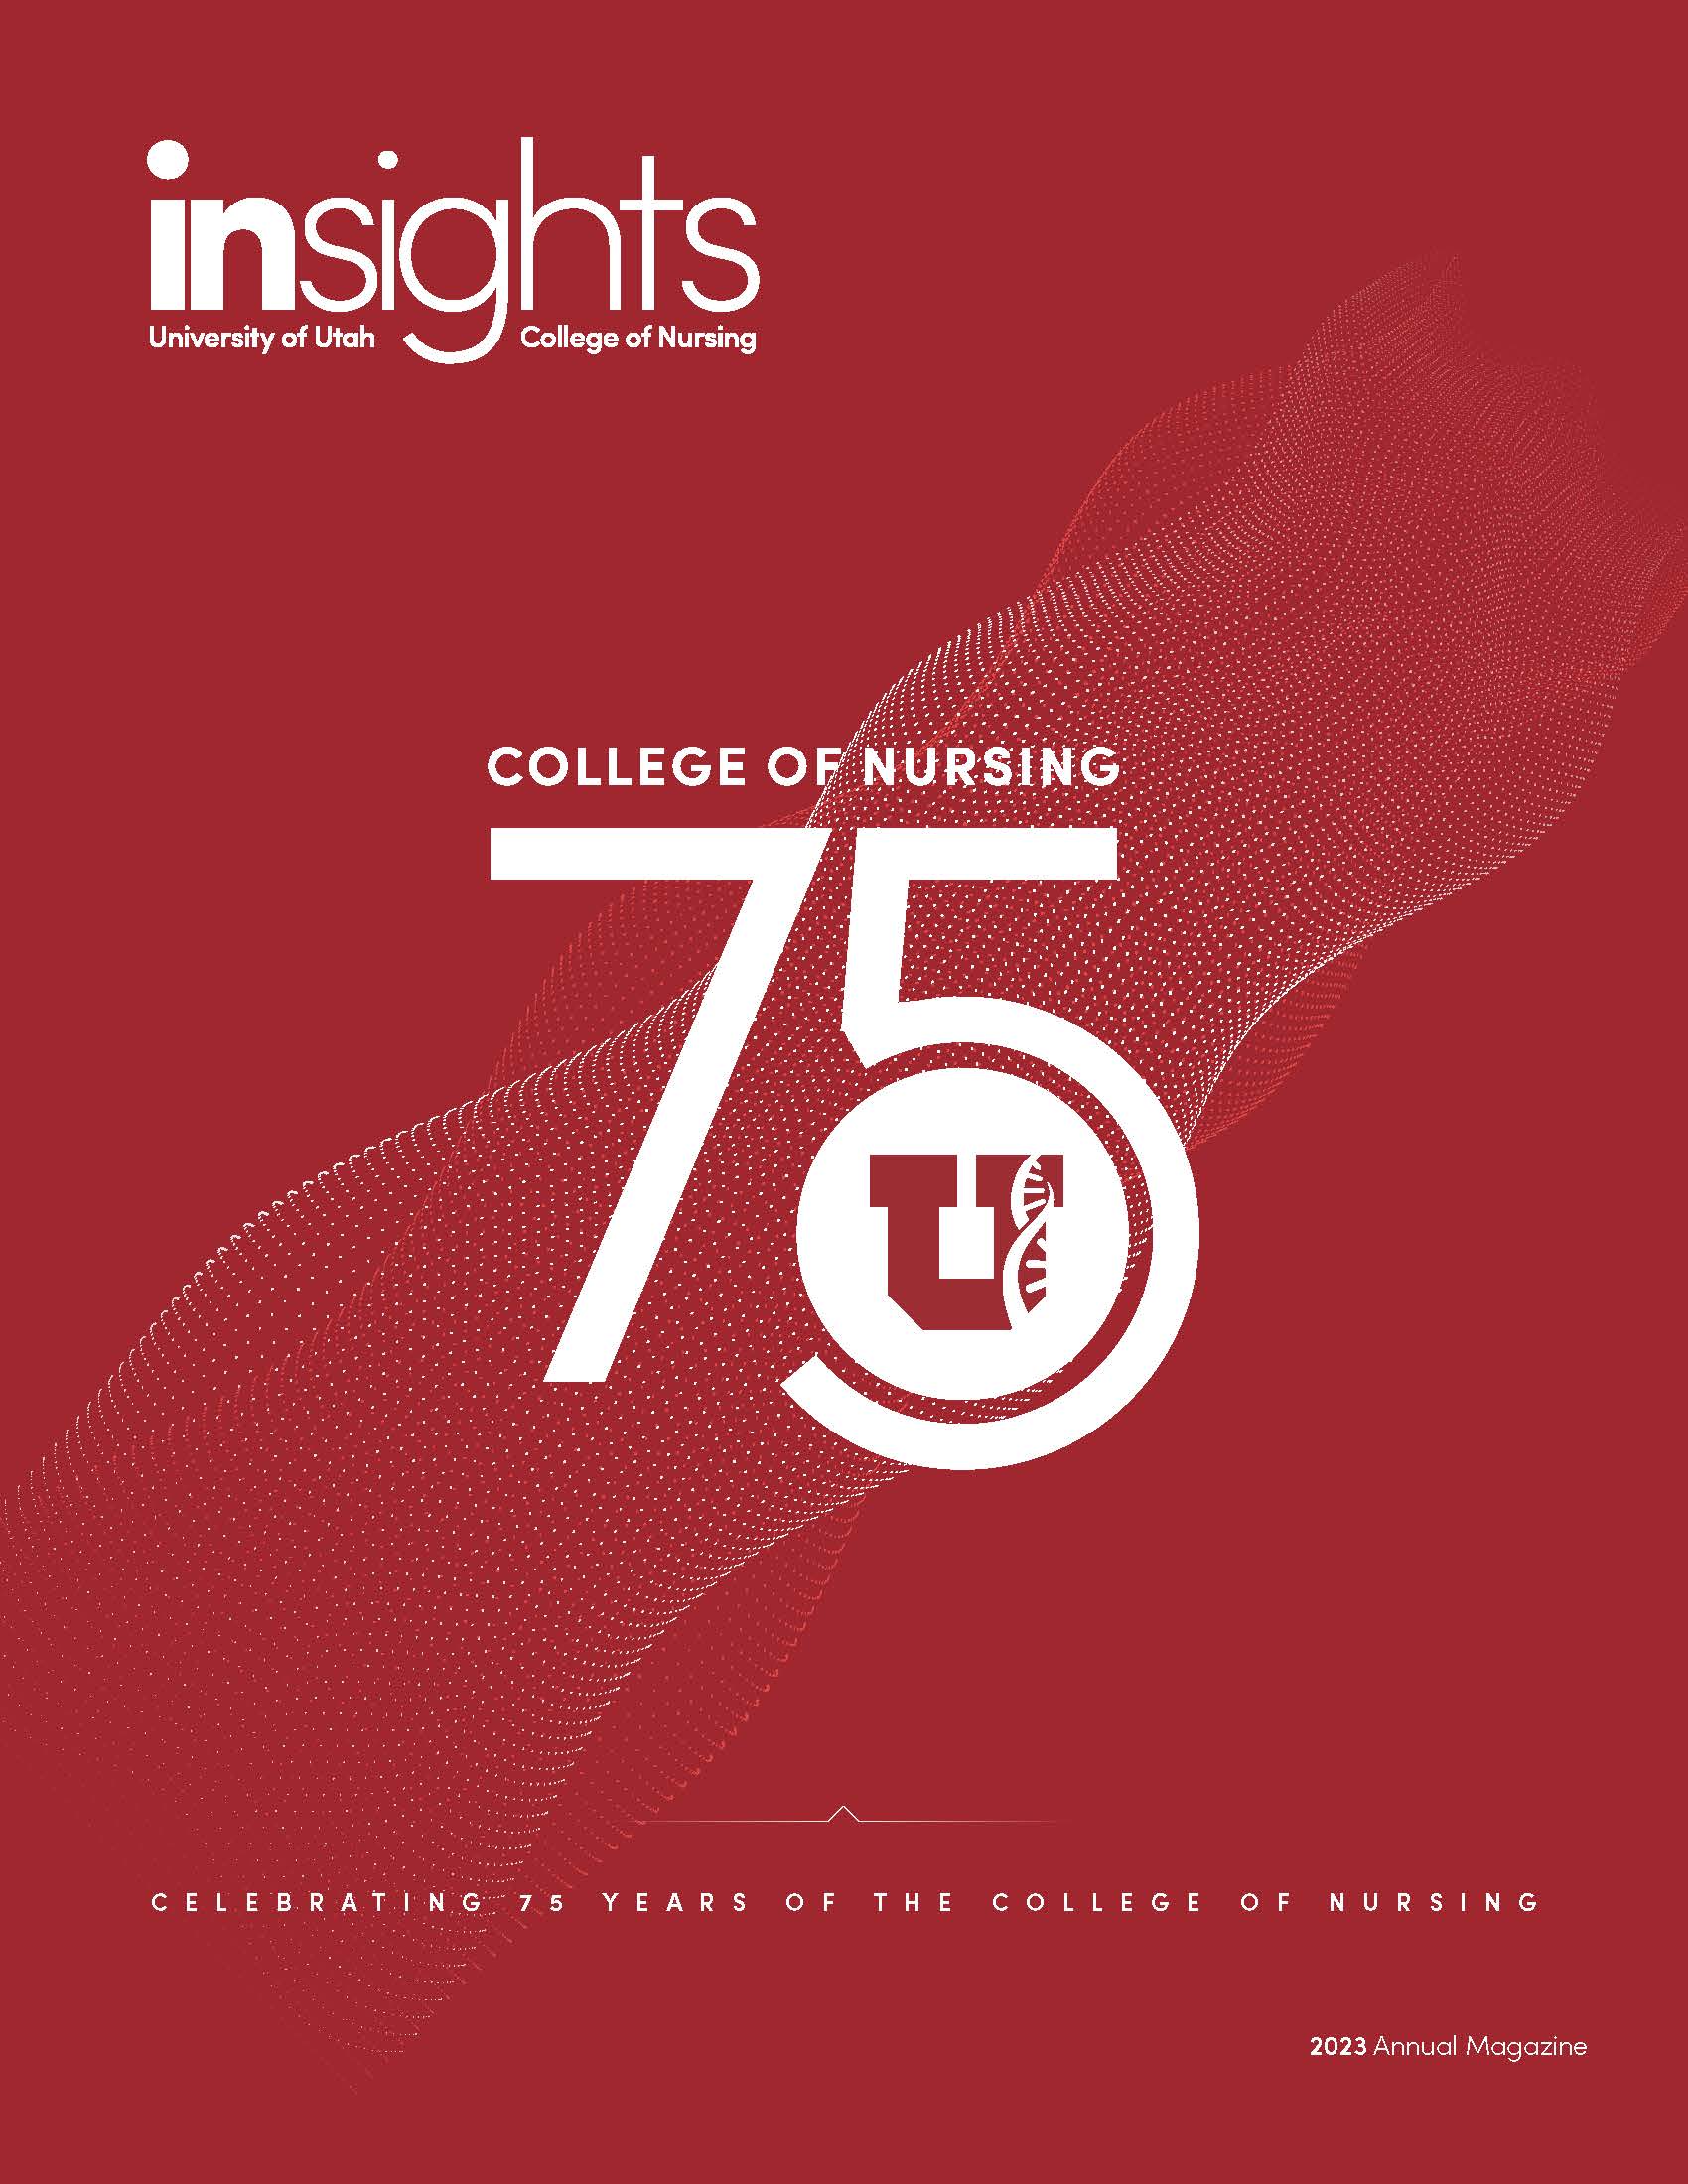 College of Nursing Insights Magazine 2022 Cover